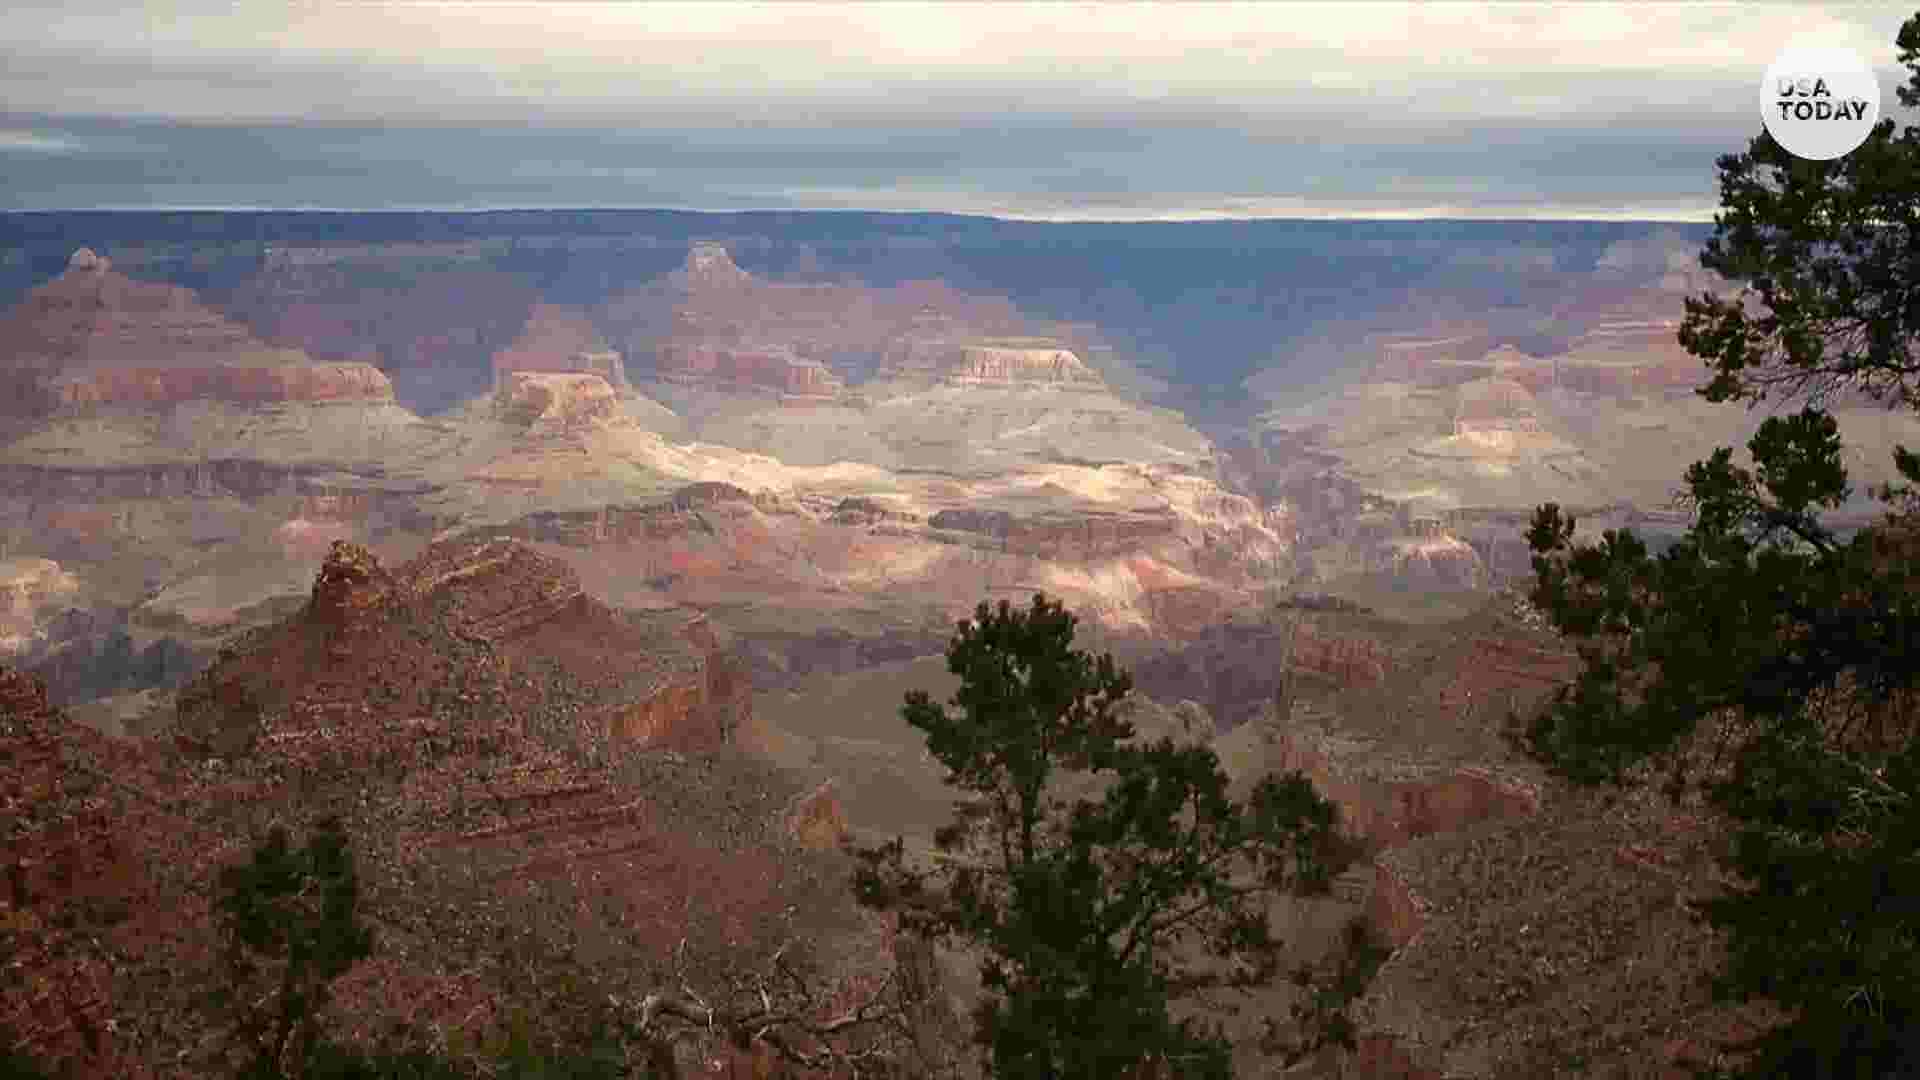 Man falls off edge at Grand Canyon; marks 3rd visitor death in 8 days